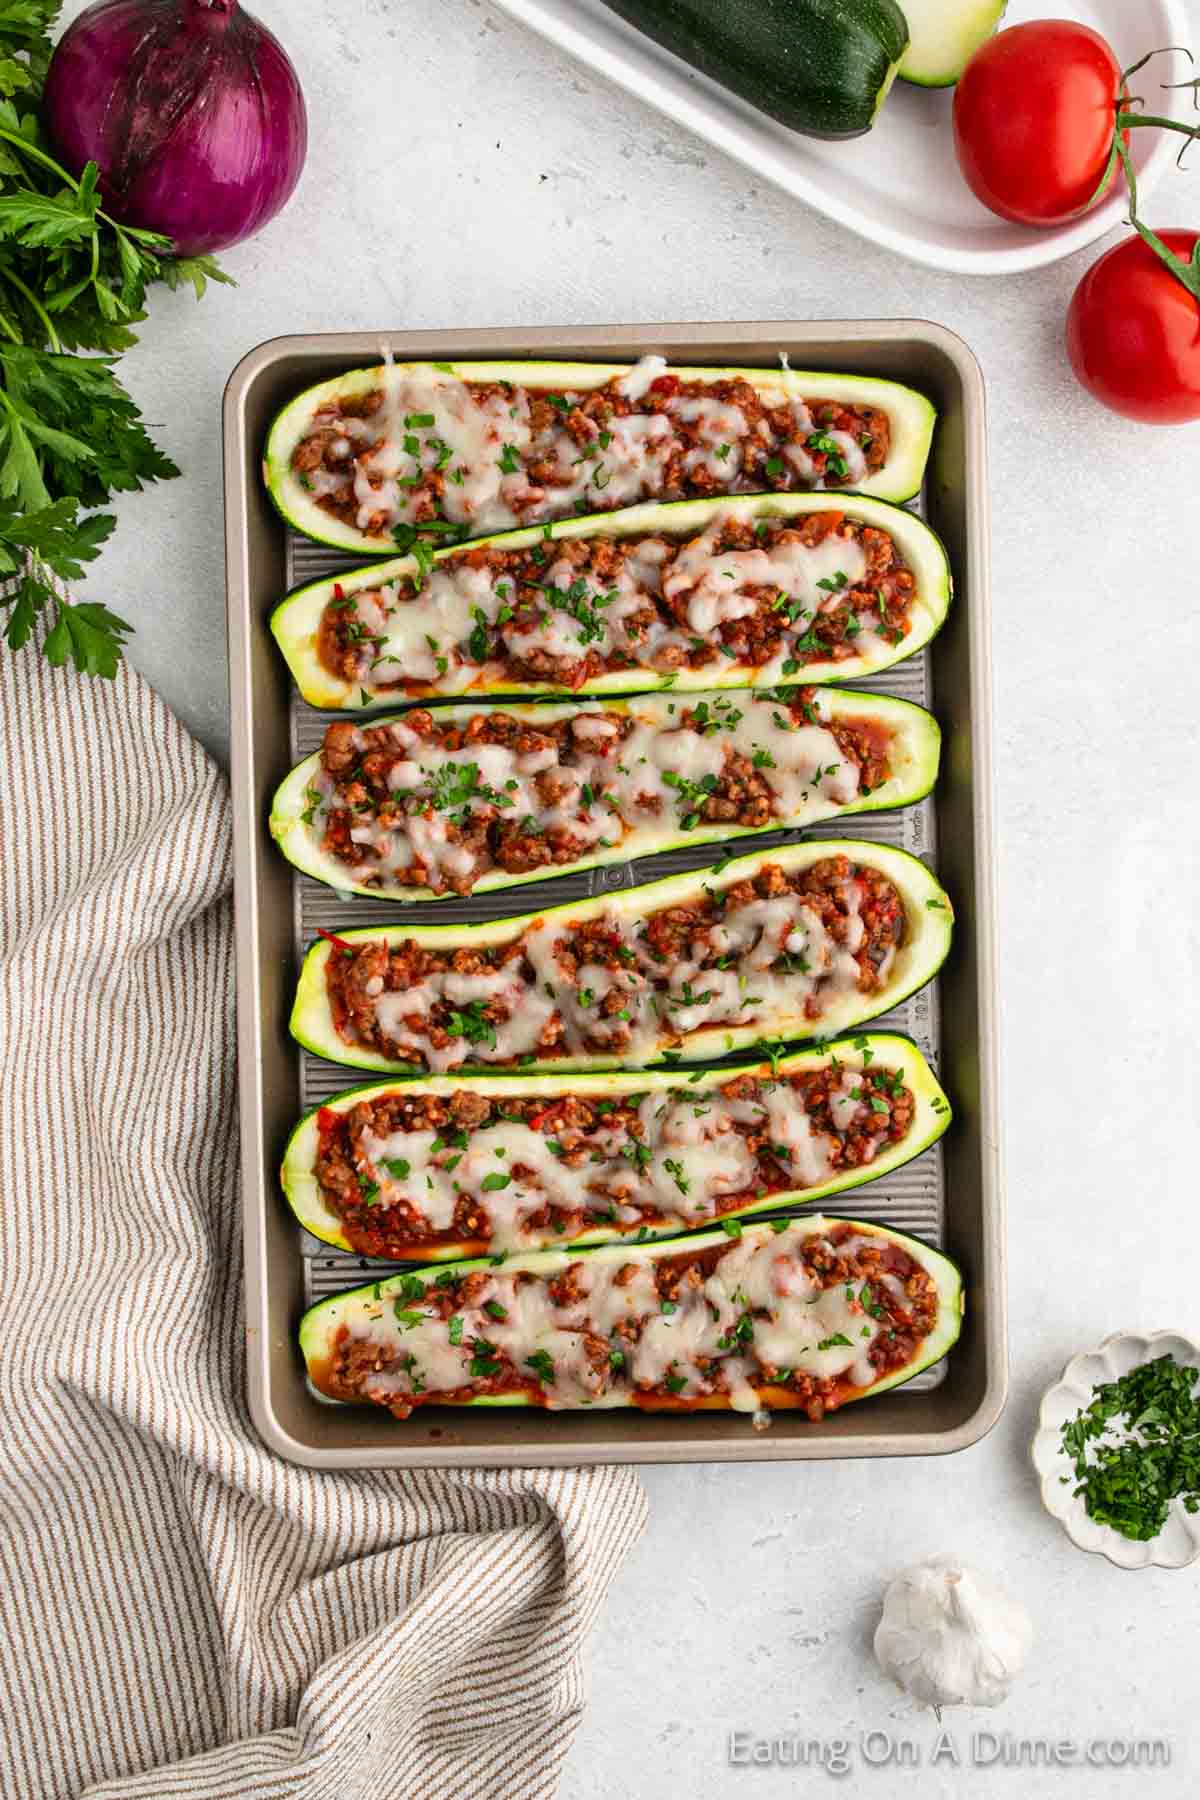 A baking sheet holds halved zucchini boats stuffed with a savory meat and tomato mixture, topped with melted cheese and garnished with parsley. Nearby, there are fresh tomatoes, garlic, a red onion, zucchini, parsley, and a striped kitchen towel—perfect for recreating this stuffed zucchini boats recipe.